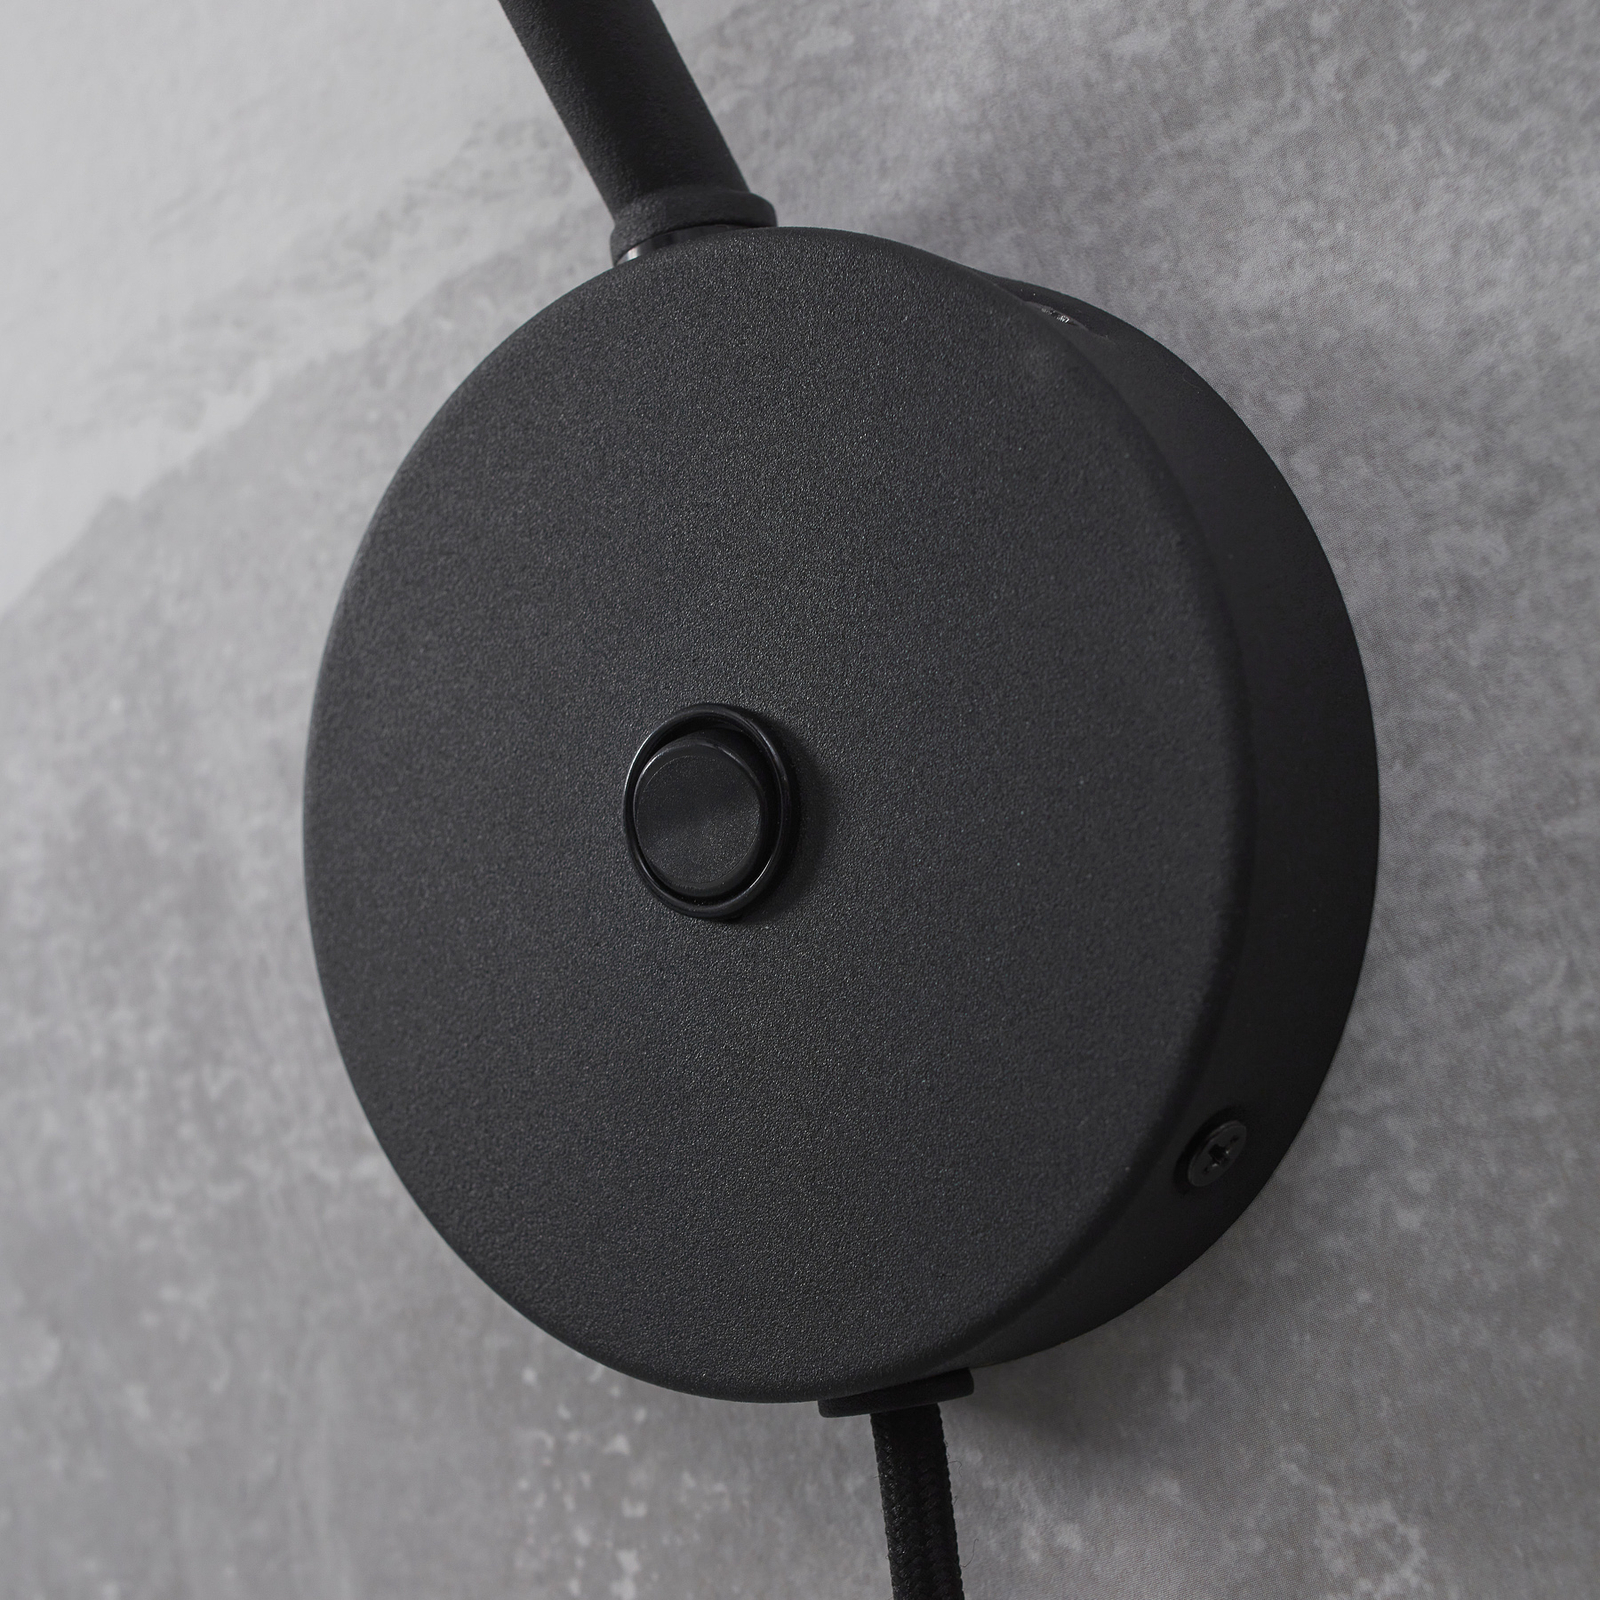 It's about RoMi wall light Montreux, black